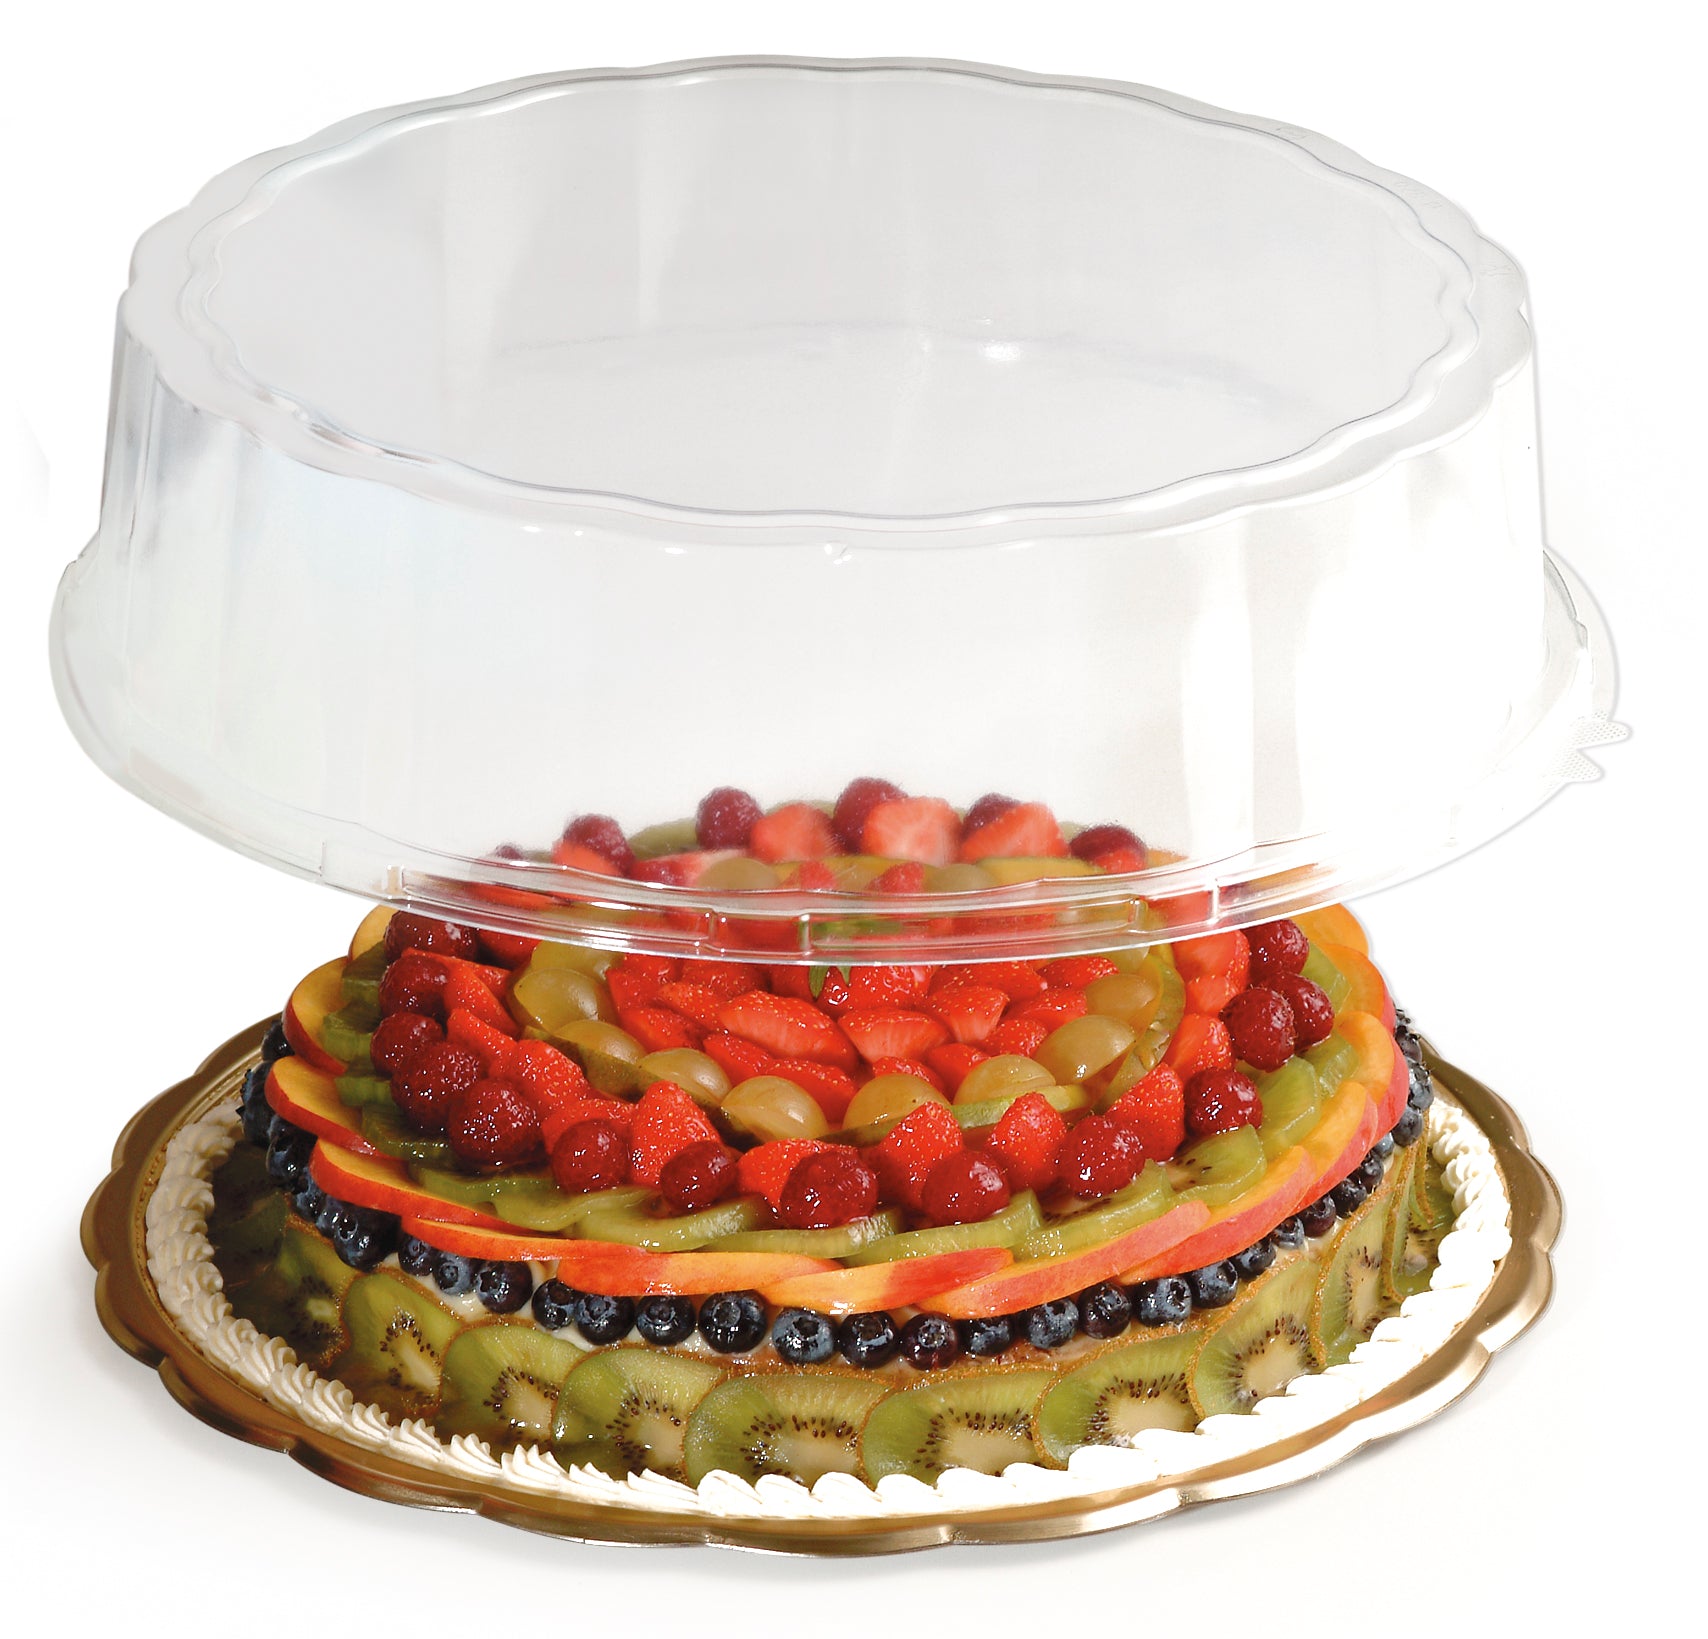 Round Medoro Pastry Tray Lids great for pastries, sandwiches, cakes, cupcakes, appetizers, hors d'oeuvres, cookies, brownies, sushi, savory items, and other edible food products. Wholesale food protection for bakery and restaurants.